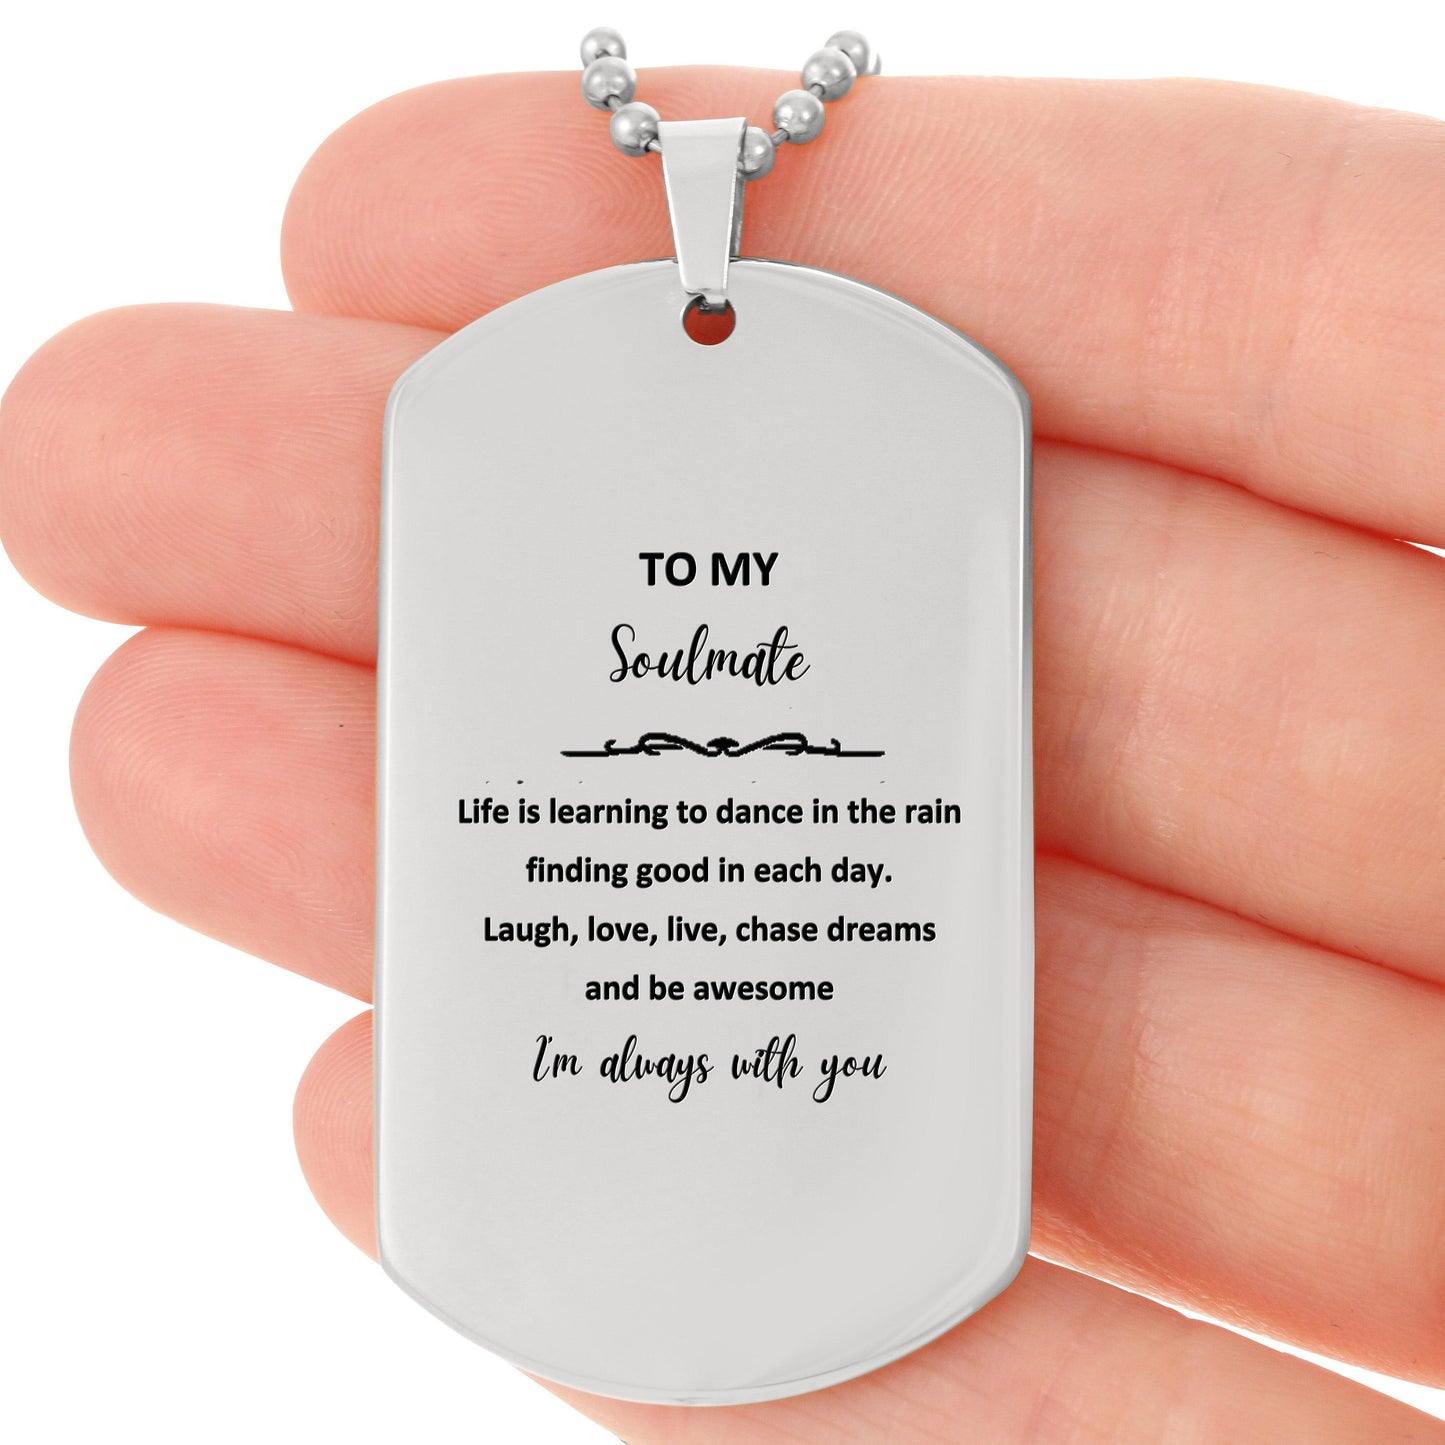 Heartfelt Soulmate Engraved Silver Dog Tag Necklace - Life is Learning to Dance in the Rain, I'm always with you - Birthday, Christmas Holiday Gifts - Mallard Moon Gift Shop